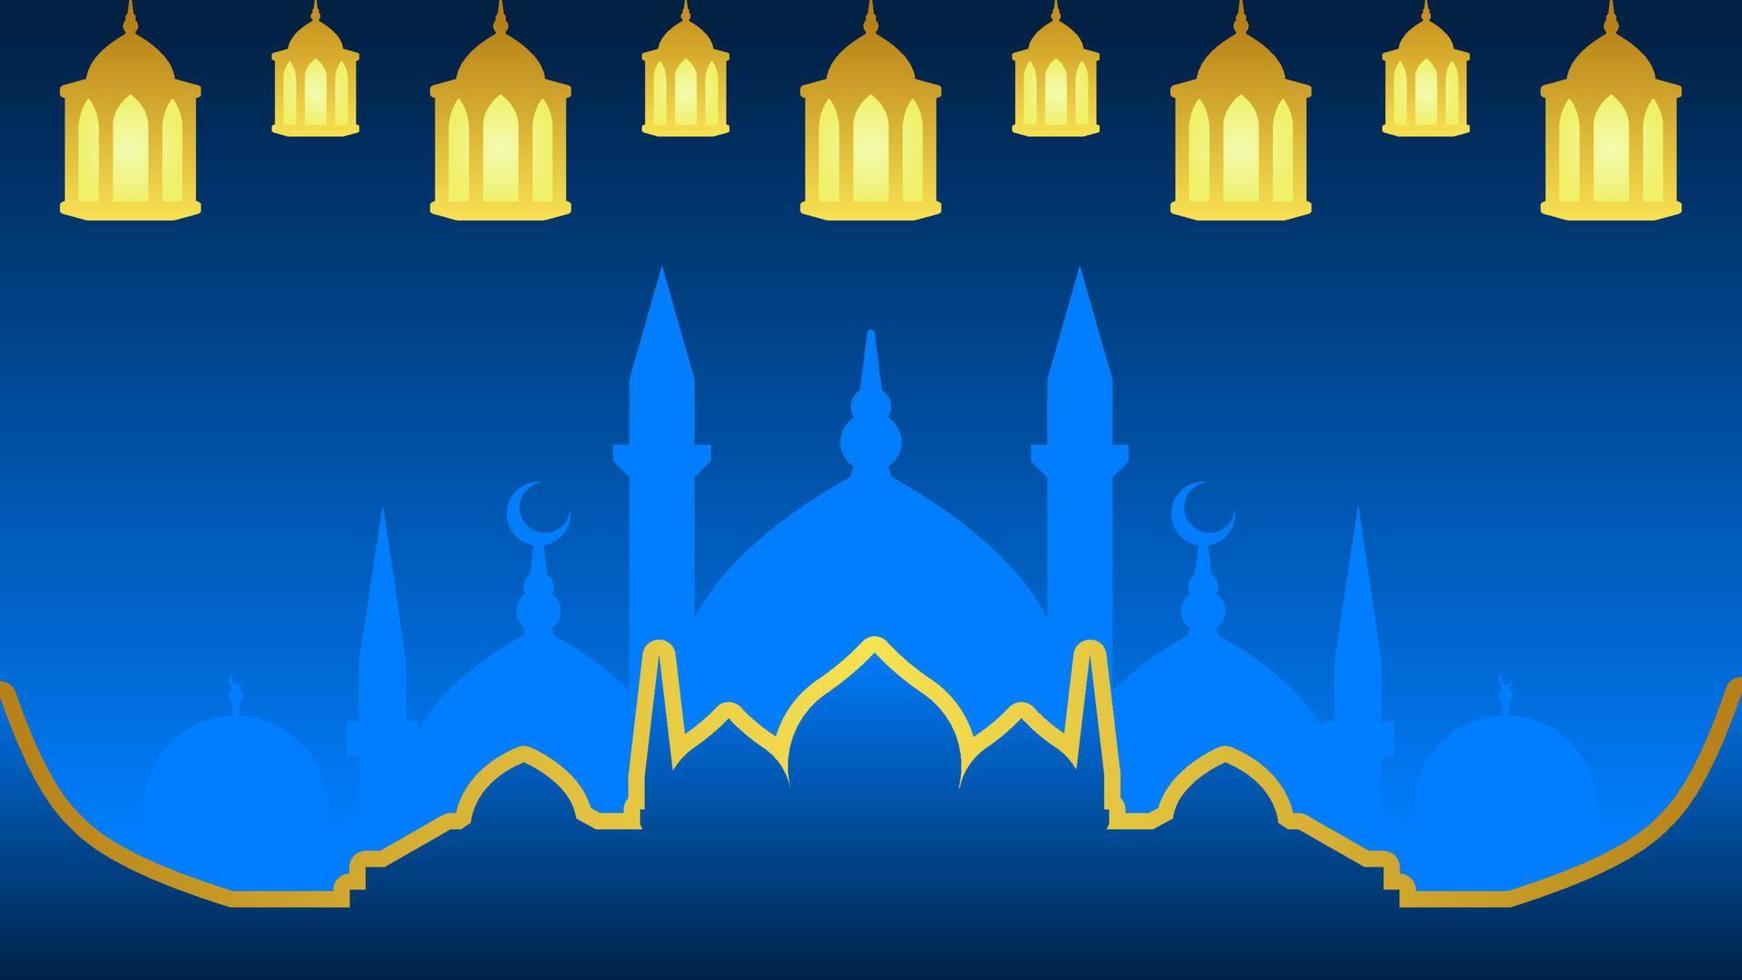 Ramadan background with lantern and star crescent for islamic design. Shiny blue background element with golden ornament for desain graphic ramadan greeting in muslim culture and islam religion vector